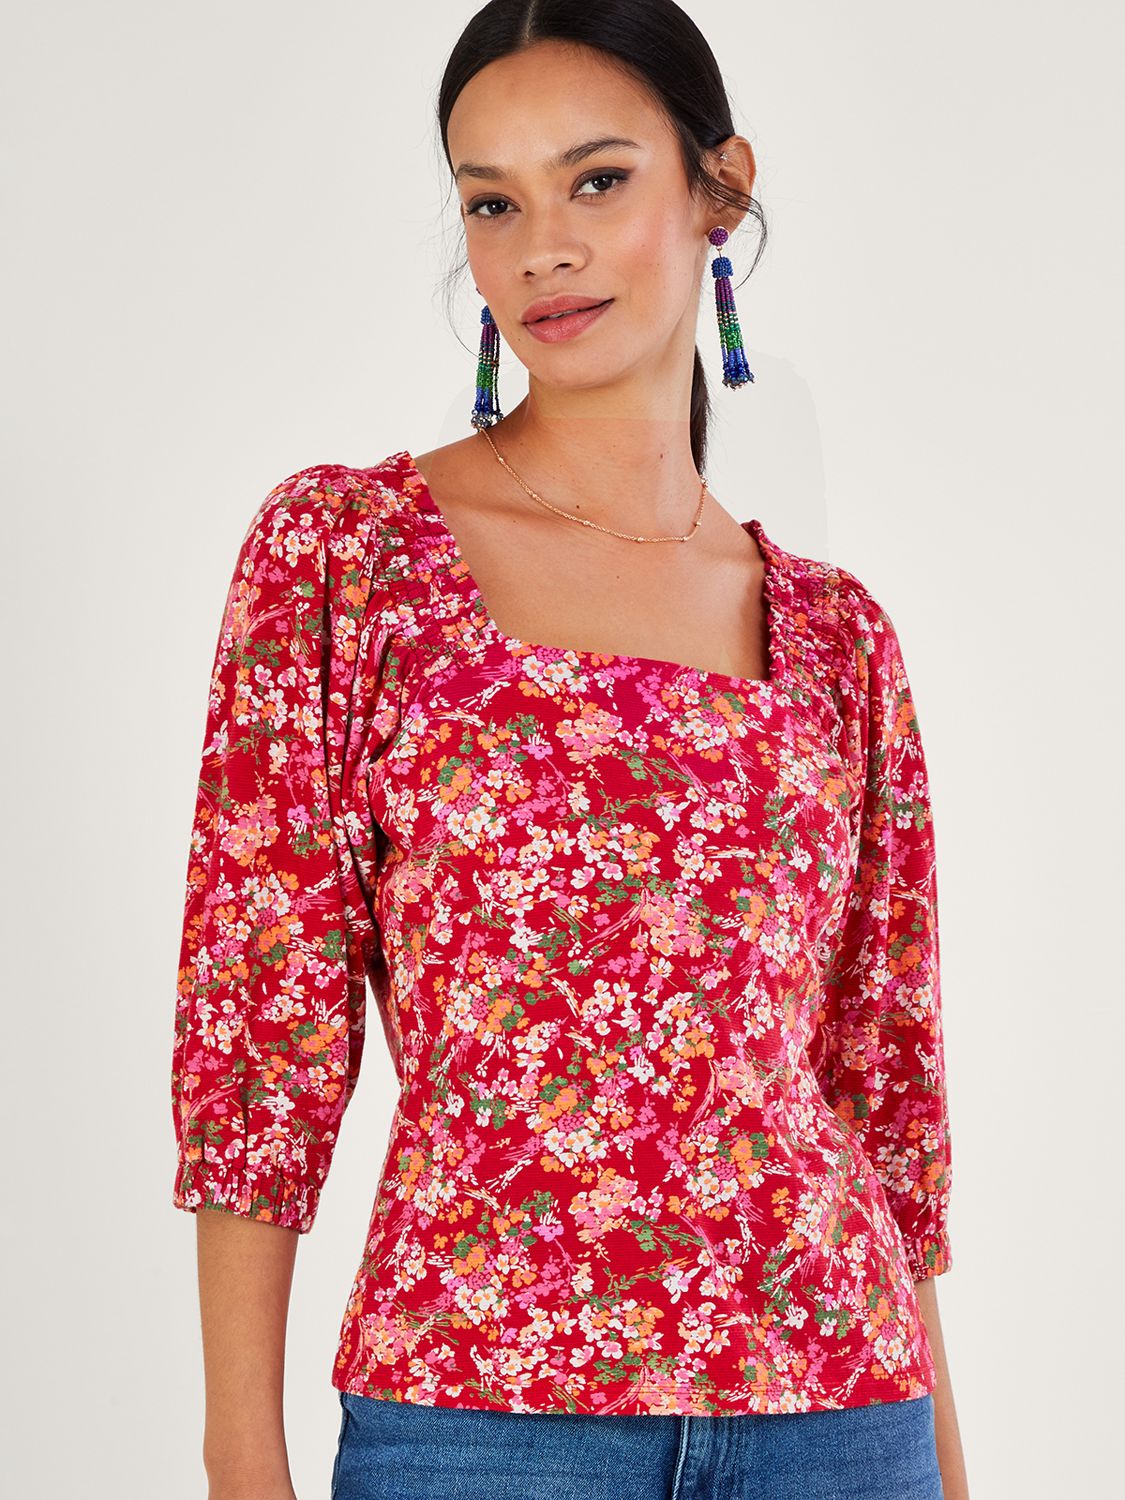 Monsoon Ditsy Floral Print Top, Red at John Lewis & Partners